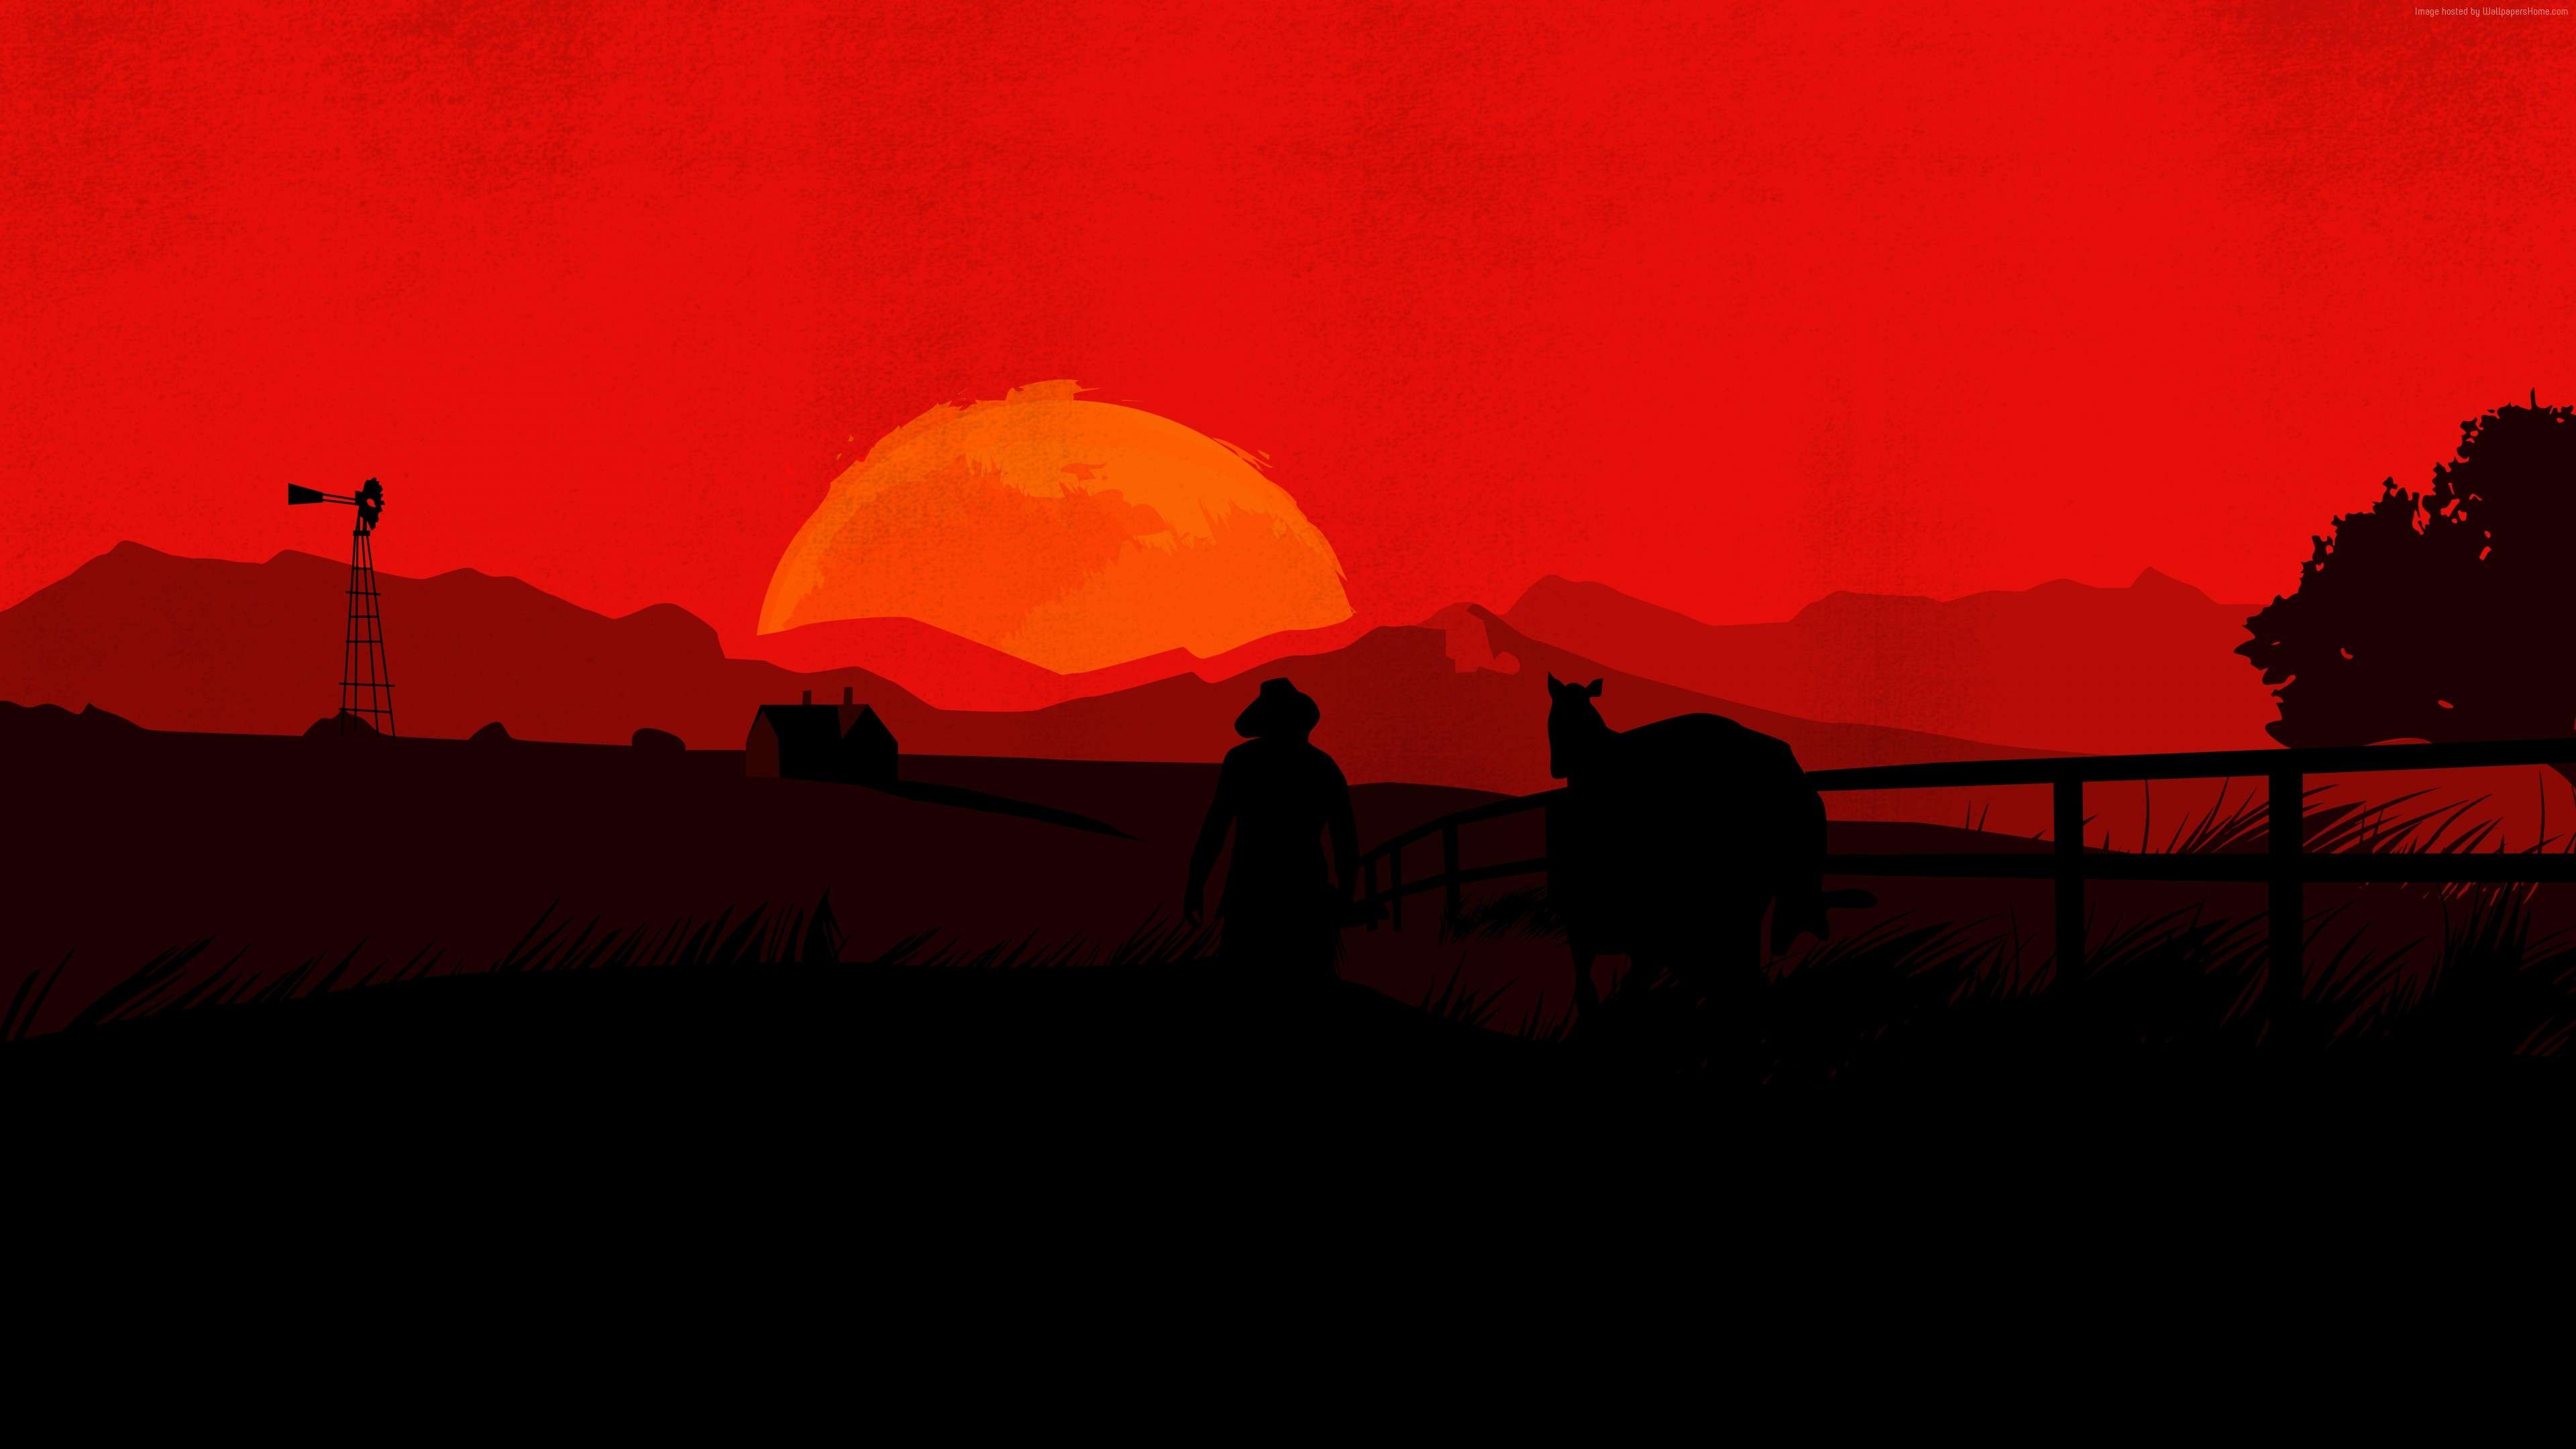 Red Dead Redemption Wallpaper Android